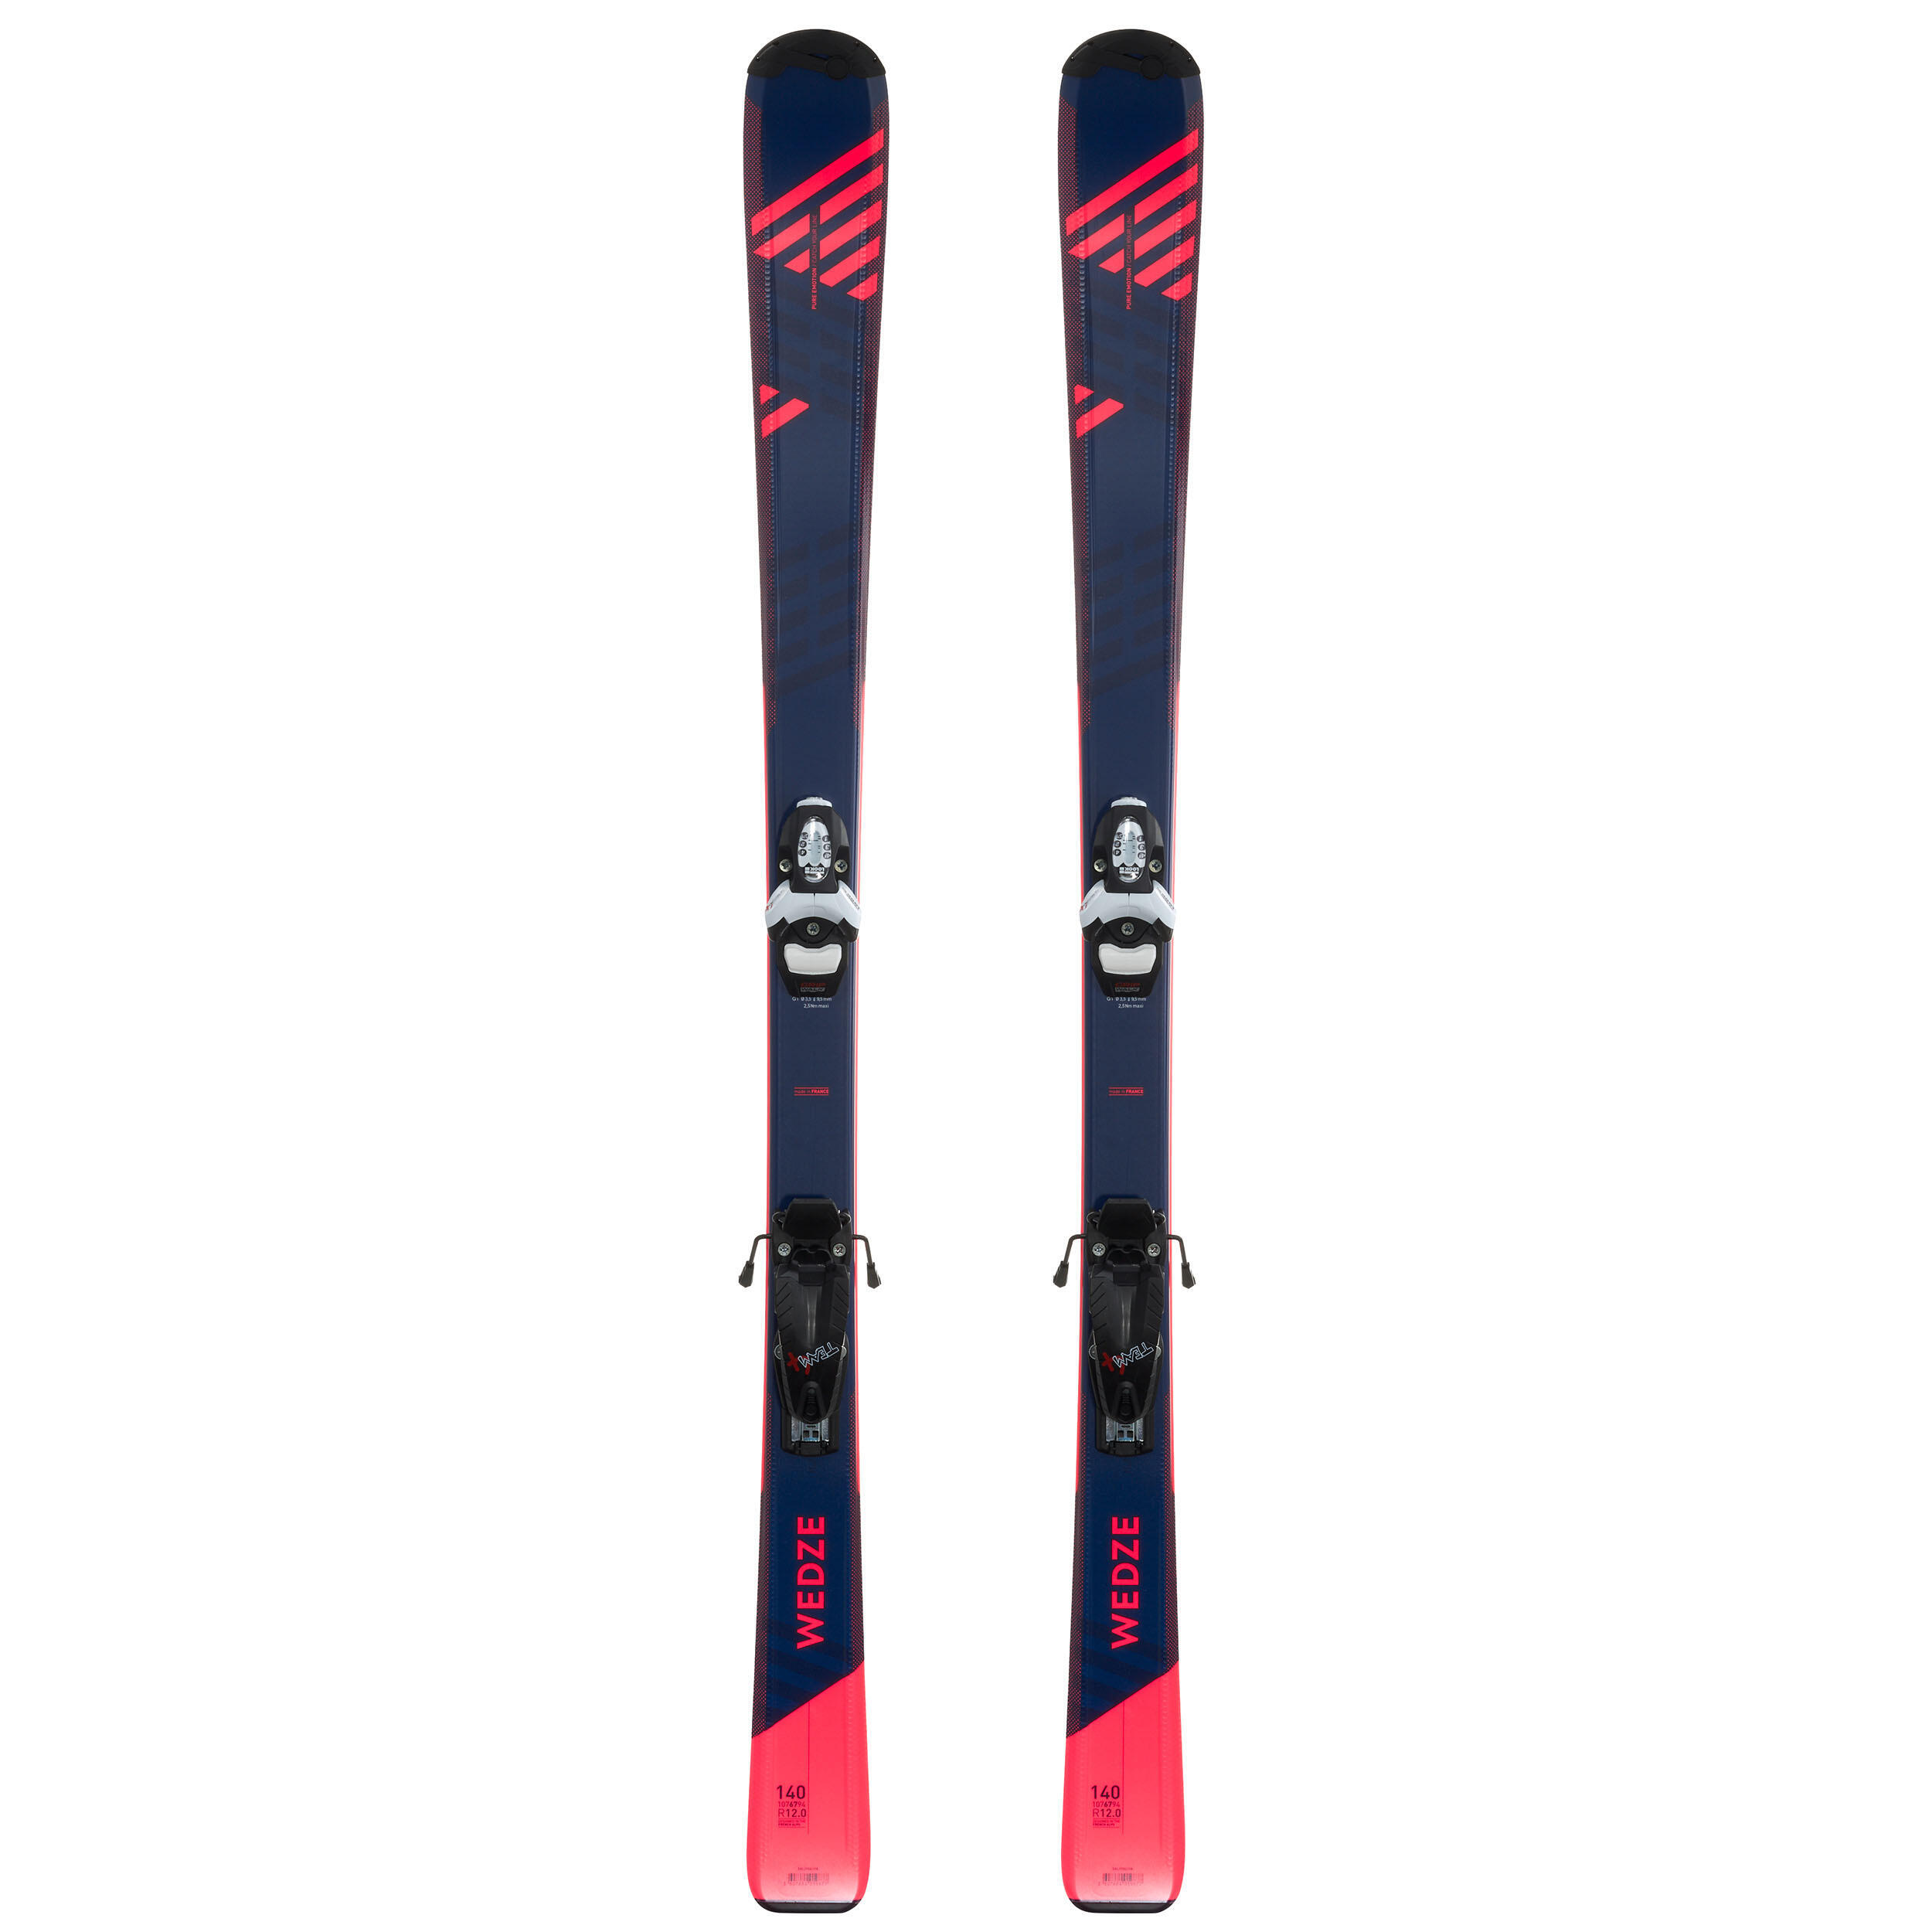 WOMEN’S DOWNHILL SKIS WITH BINDING - BOOST 500 - BLUE/PINK 2/11